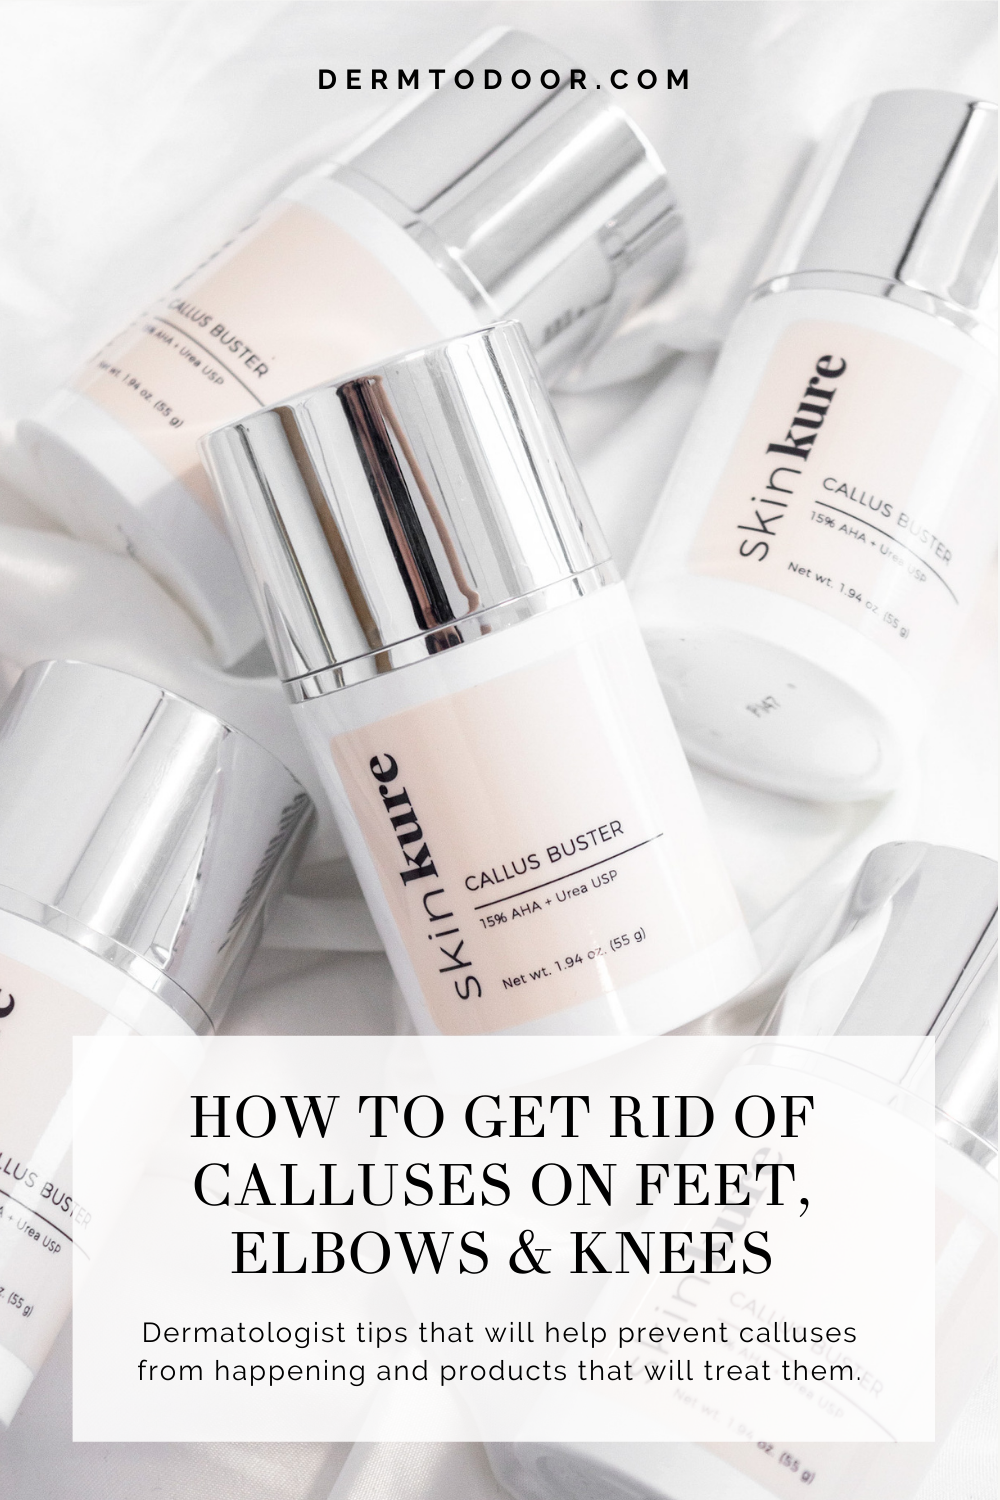 How To Get Rid Of Calluses on Feet, Elbows & Knees — Derm to Door